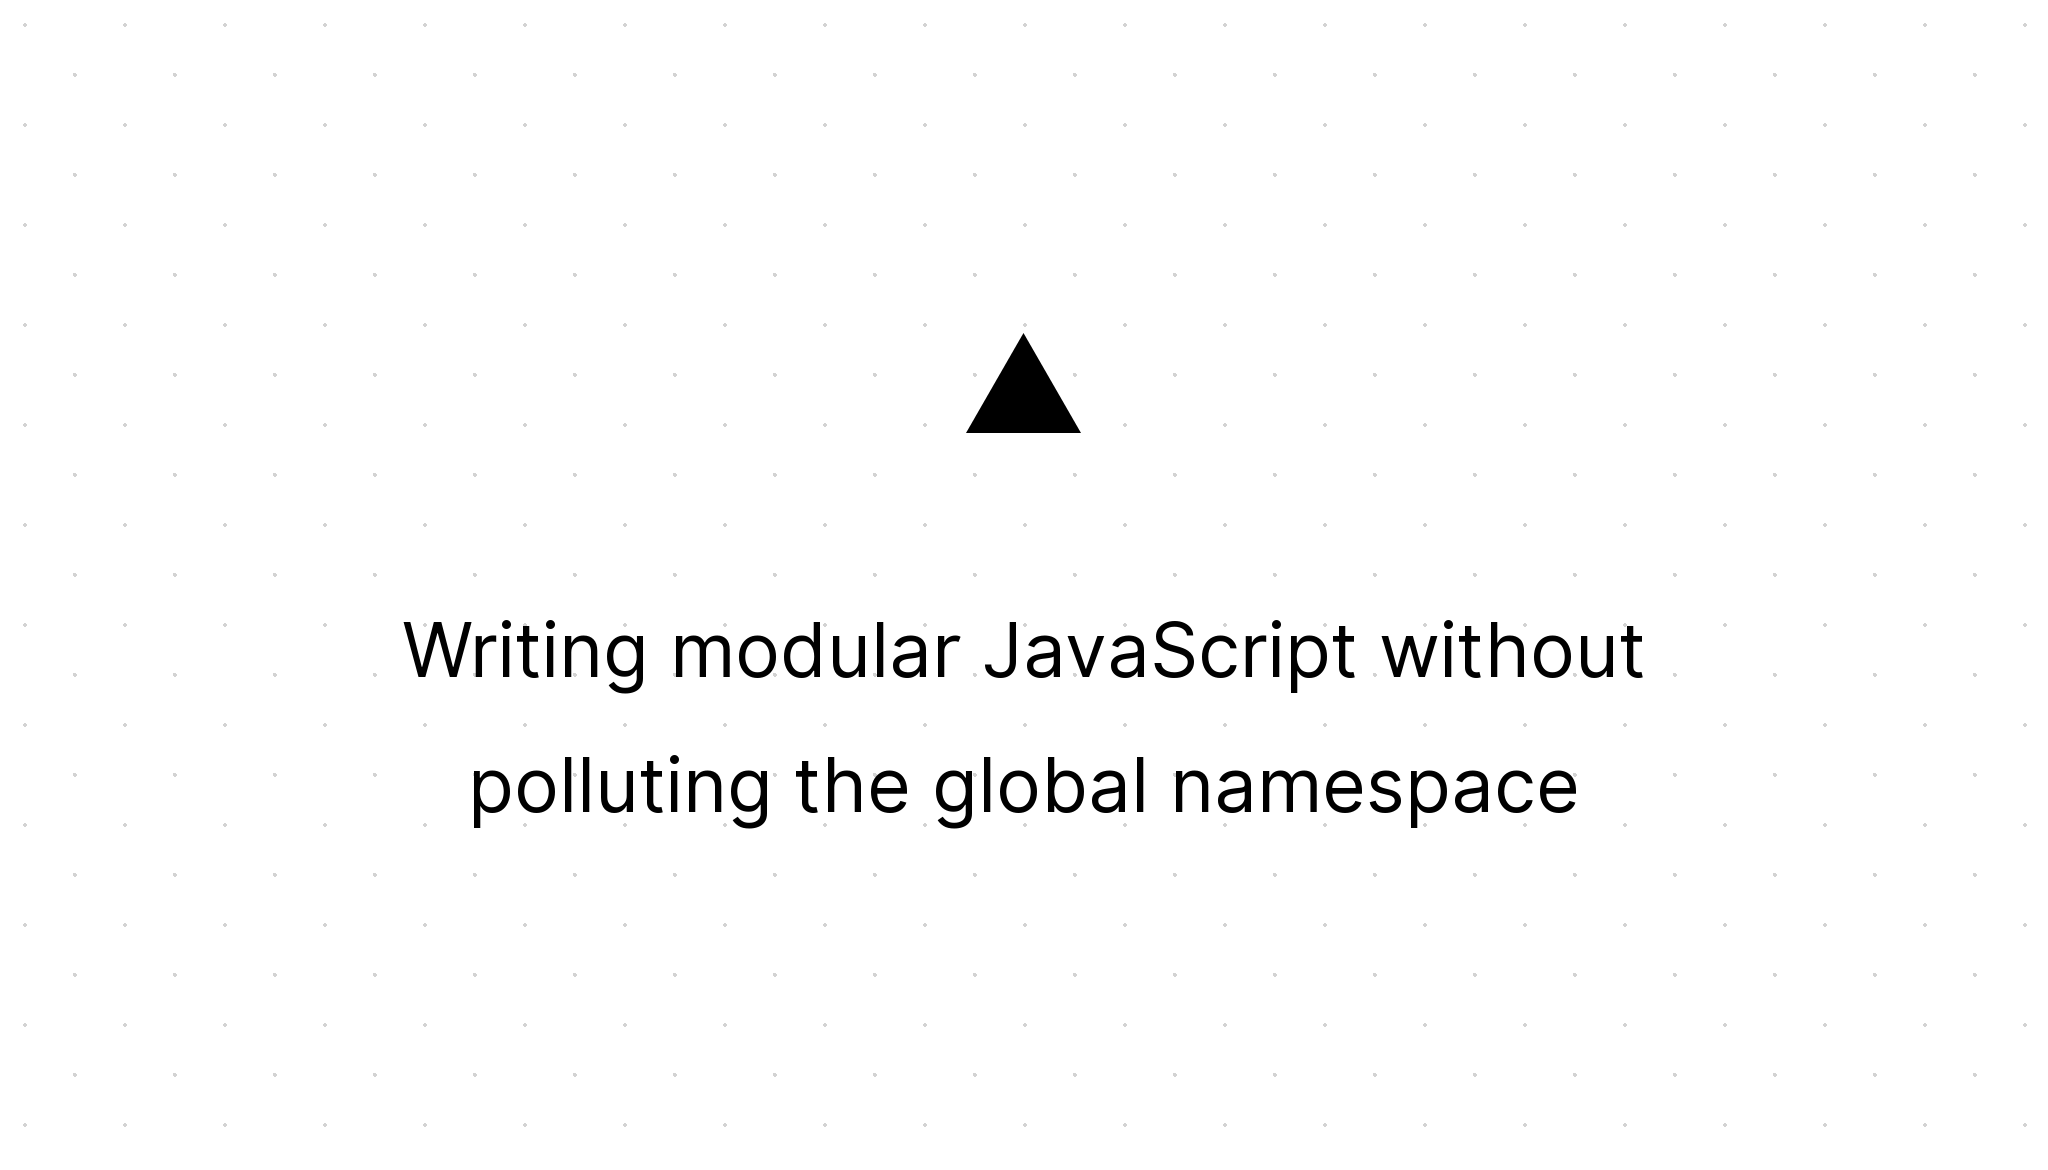 Cover Image for Writing modular JavaScript without polluting the global namespace